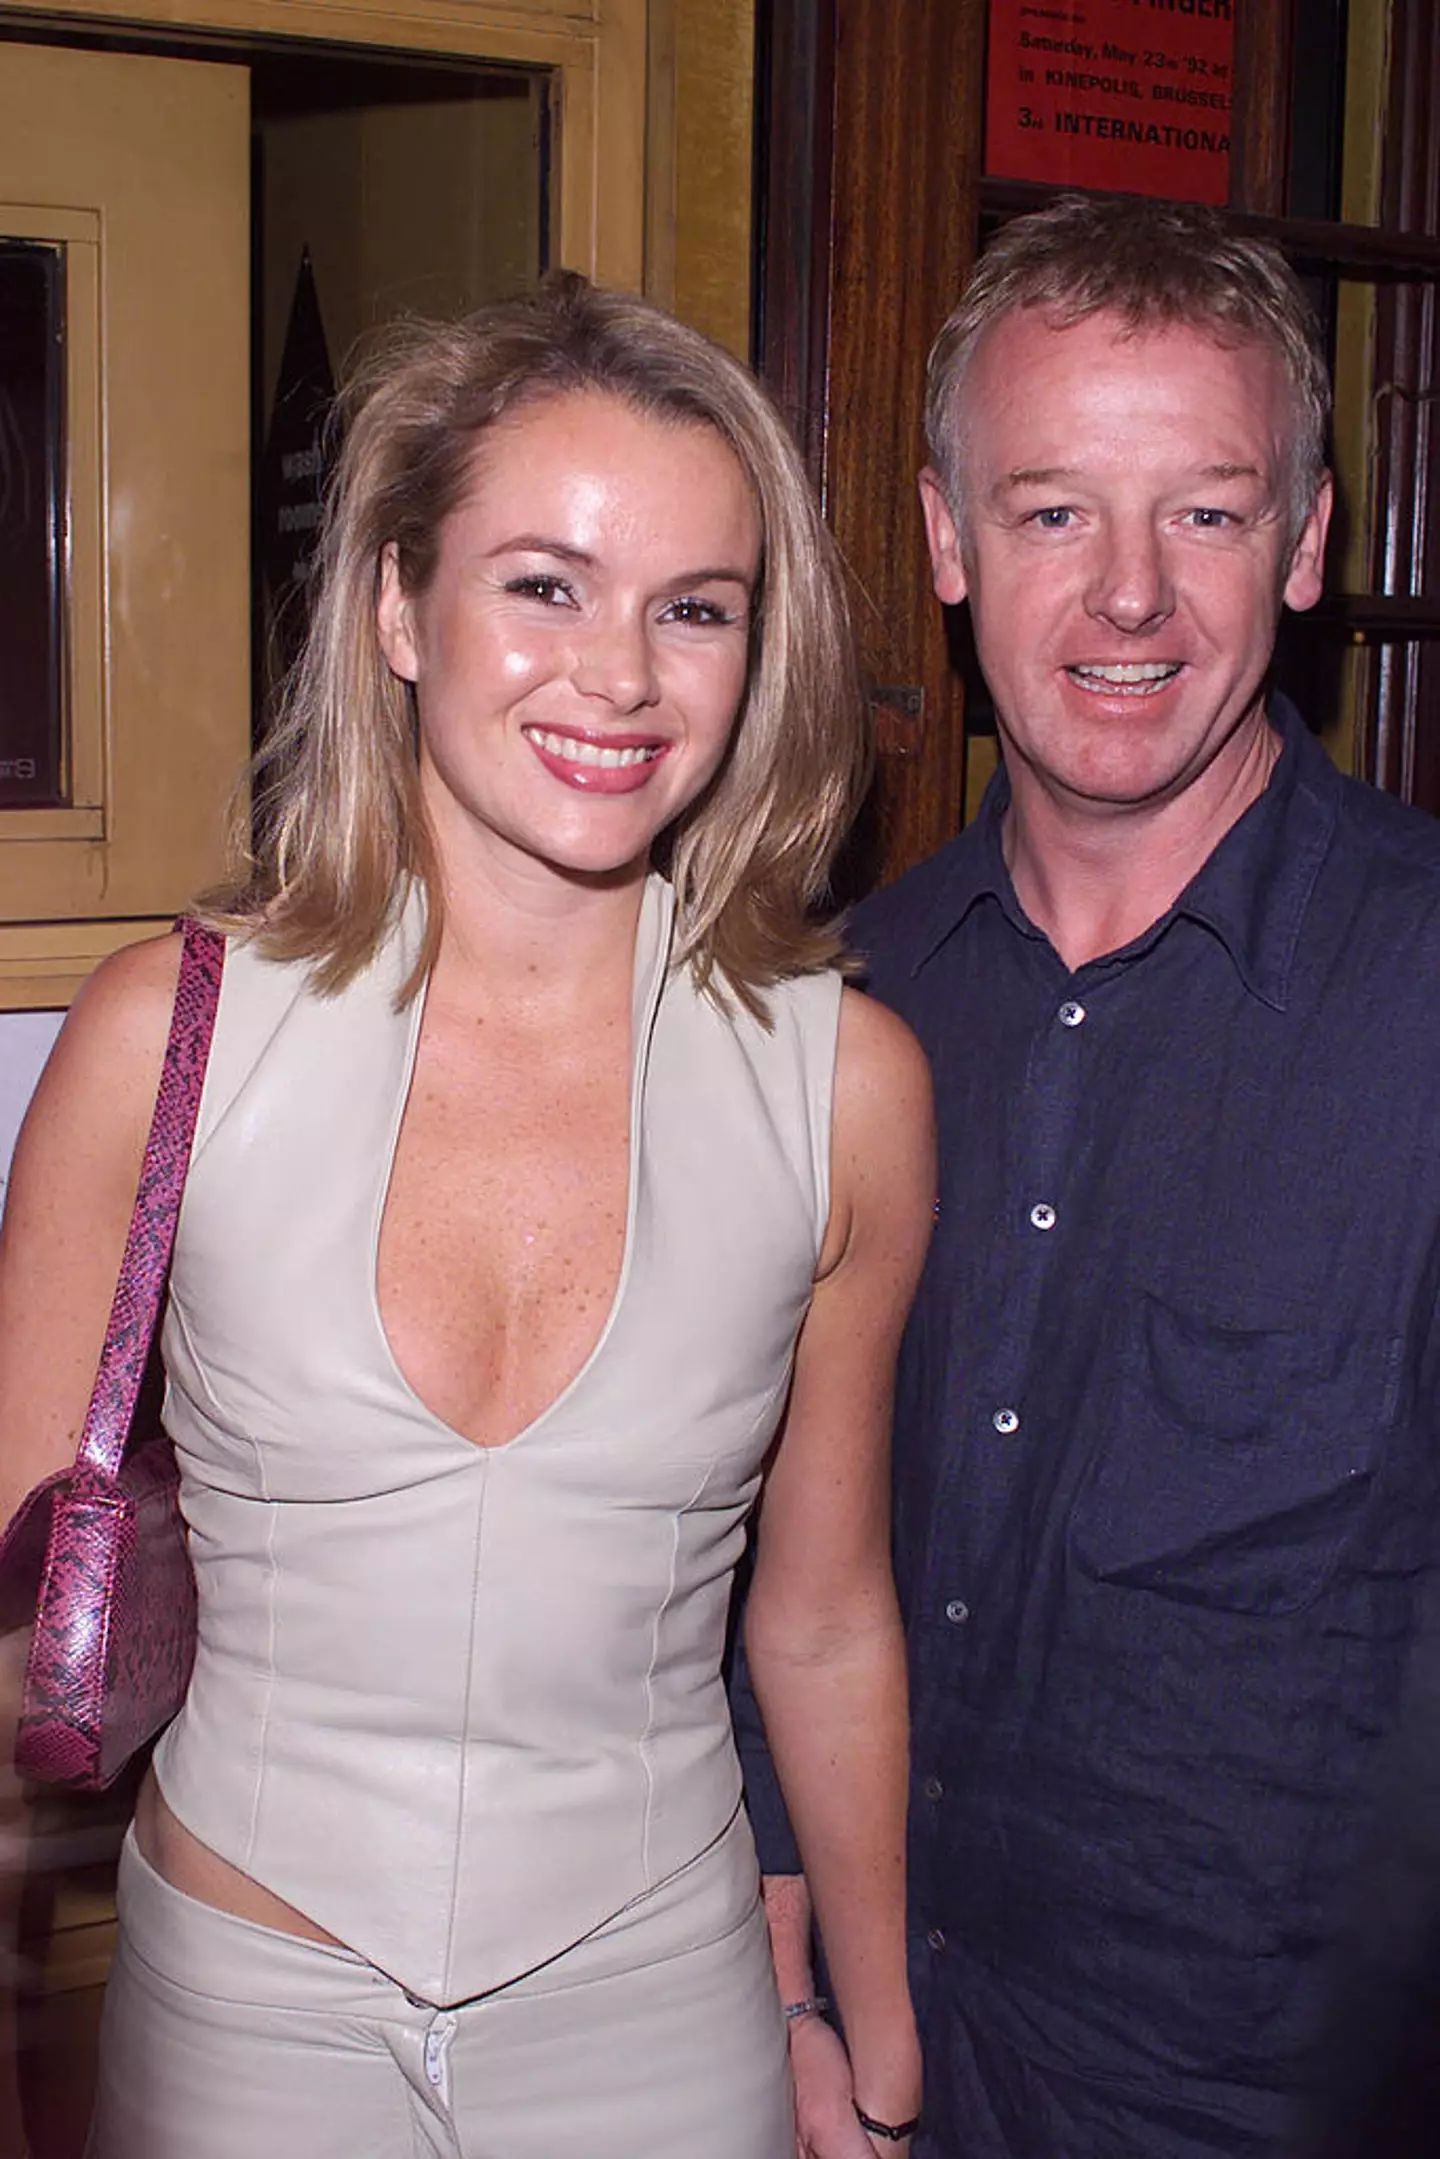 Les Dennis and Amanda Holden got married in 1995.